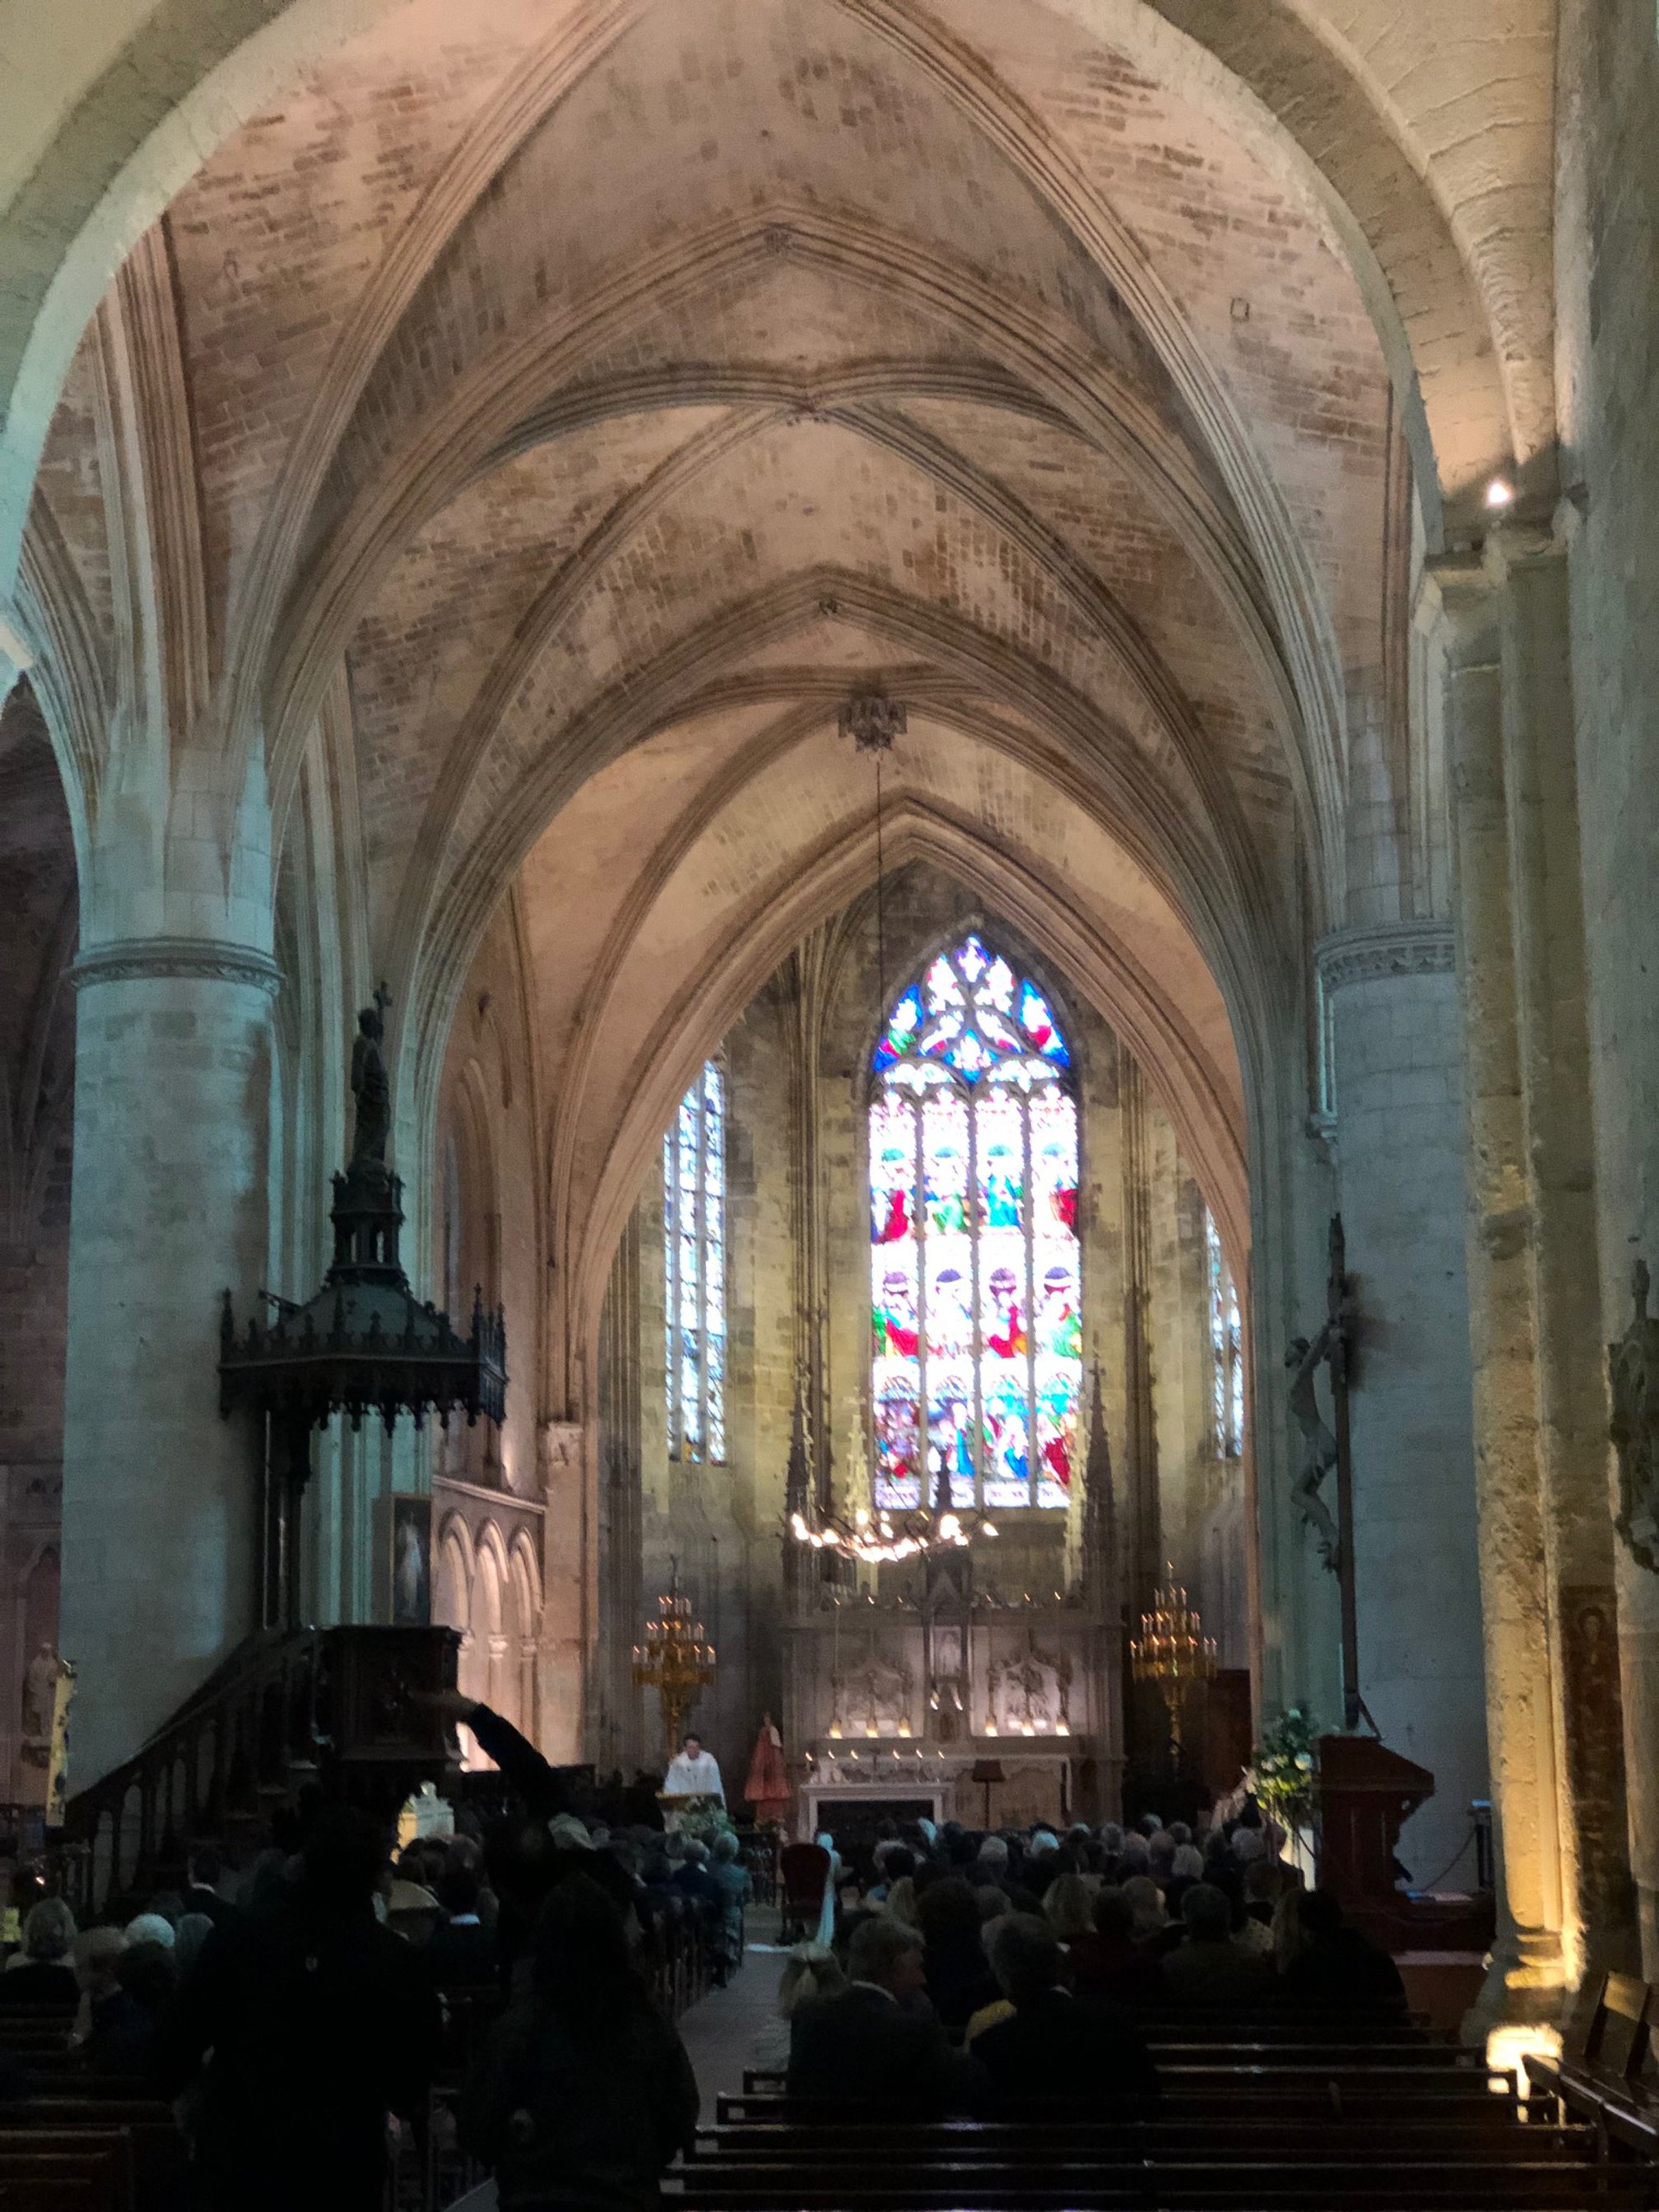  Inside the church in Saint-Emilion - in the middle of a wedding. 